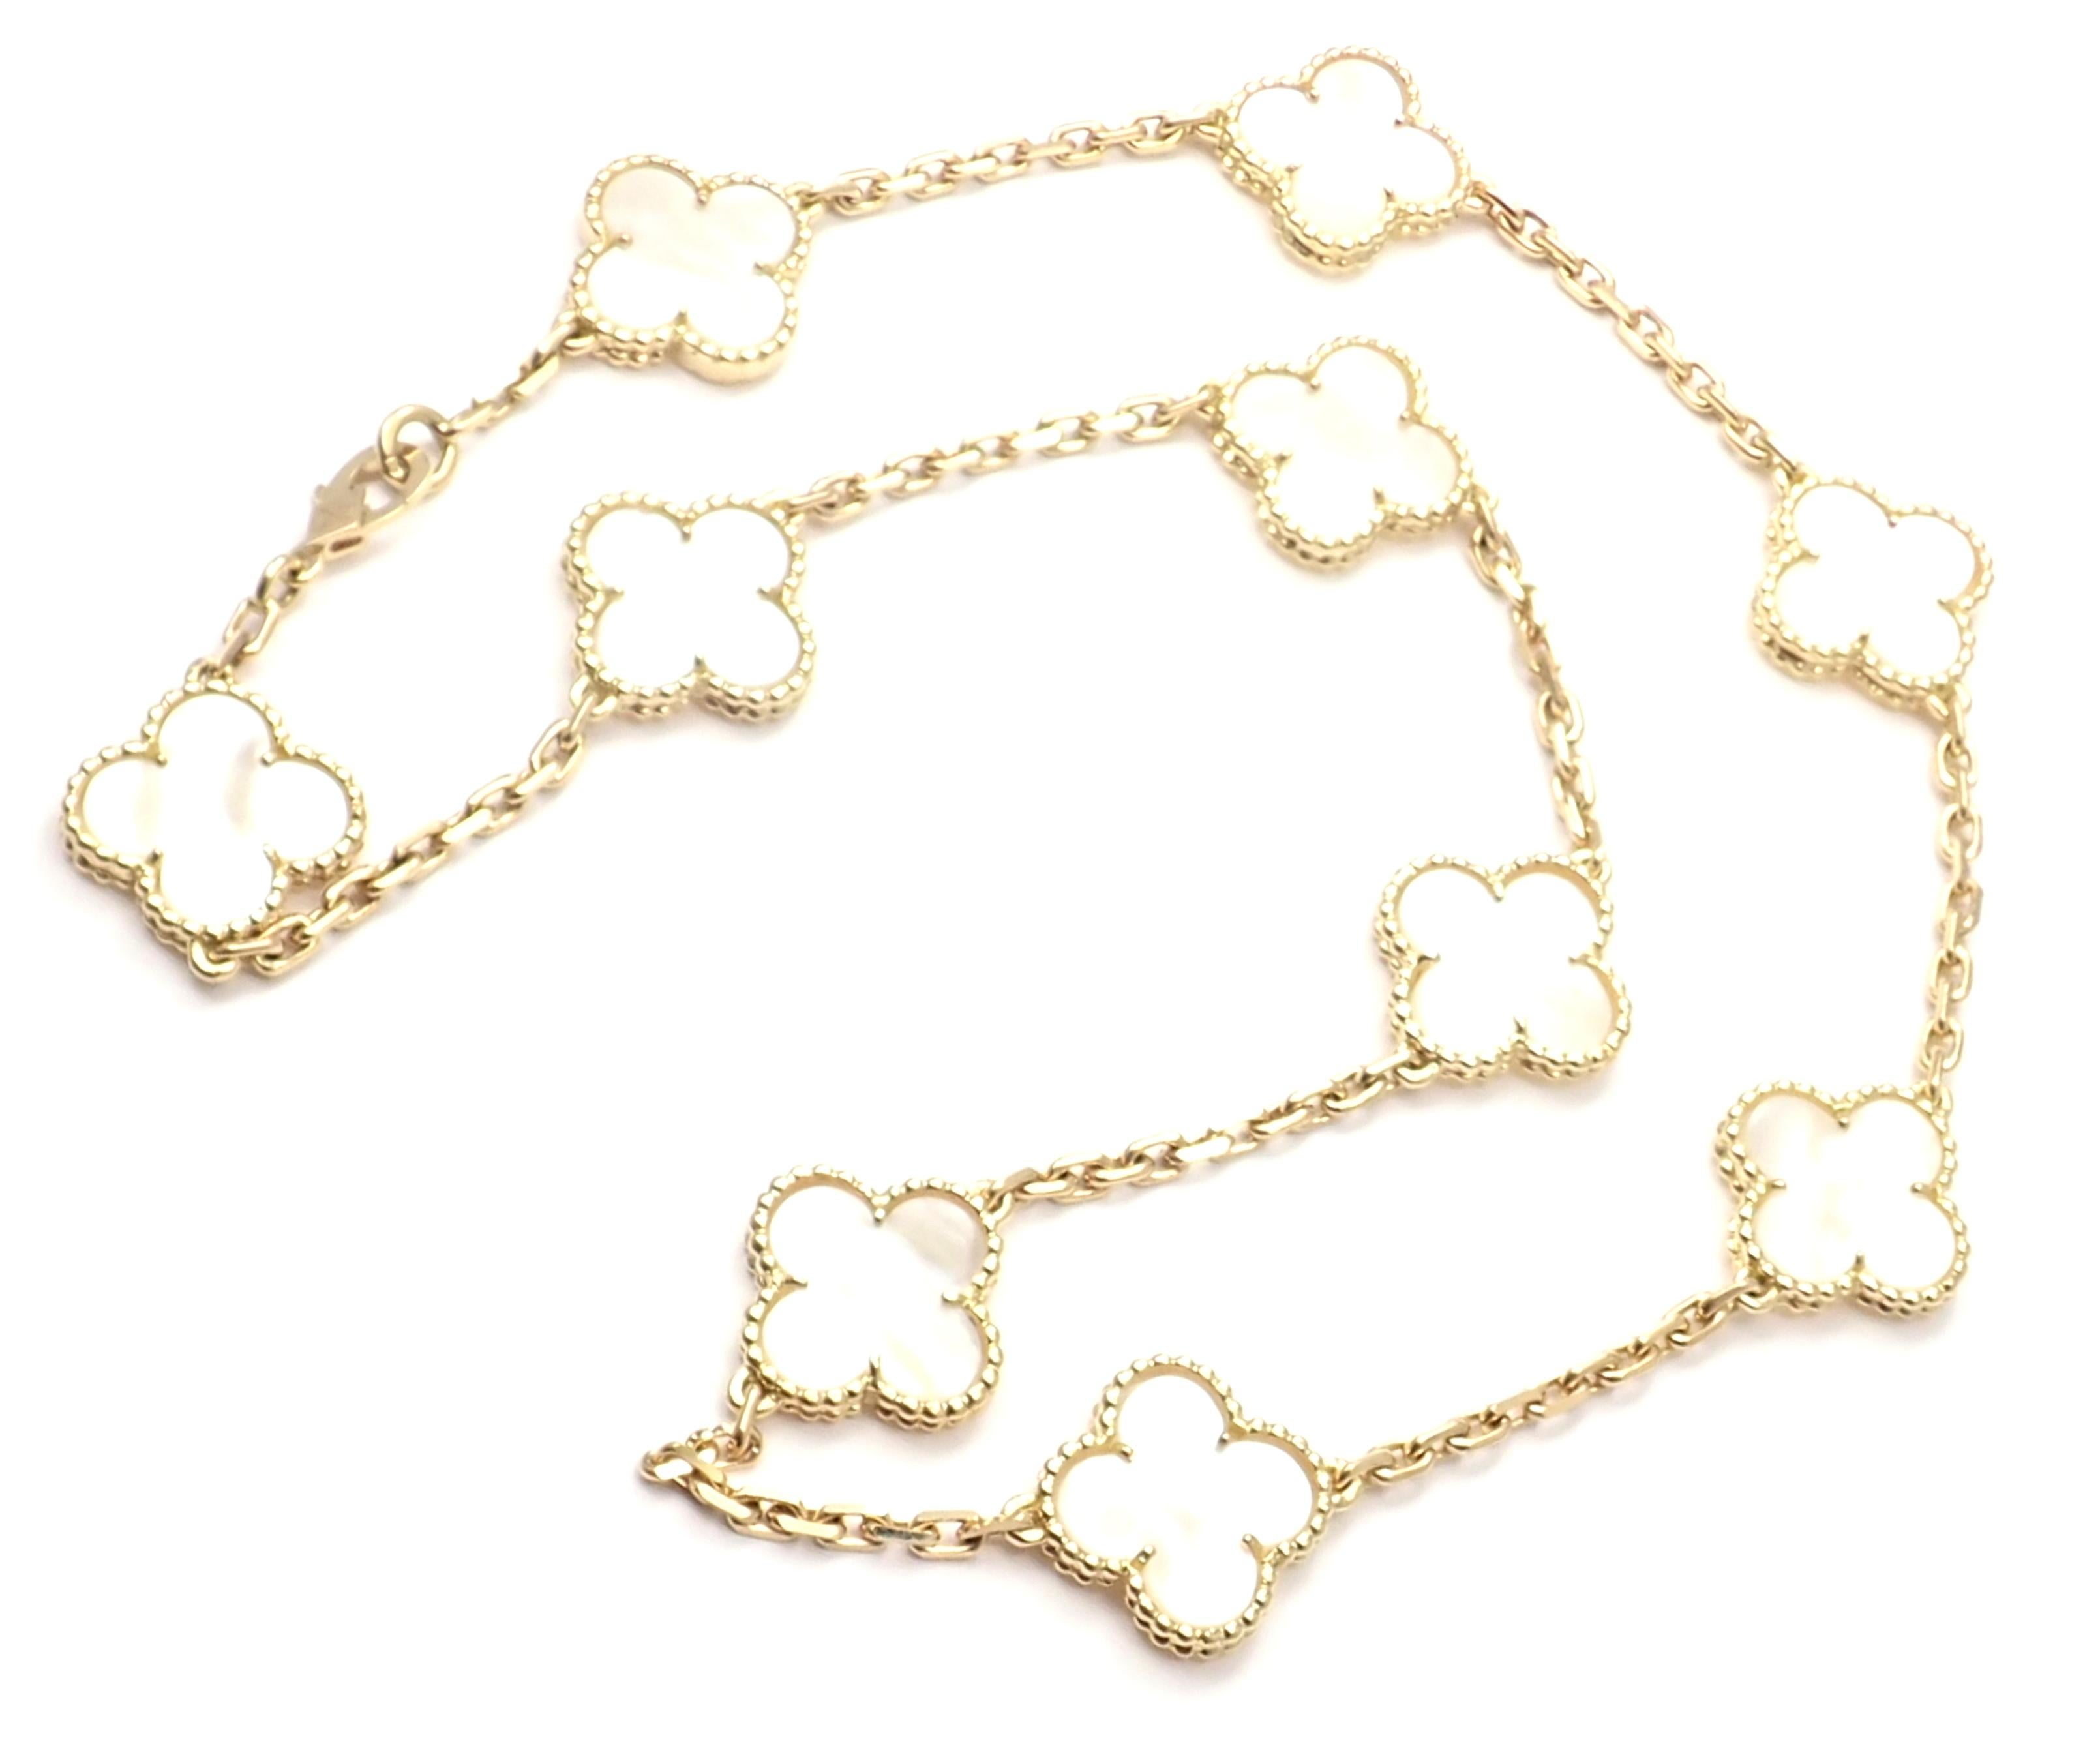 18k Yellow Gold Alhambra 10 Motifs Mother Of Pearl Necklace by Van Cleef & Arpels. 
With 10 motifs of mother of pearl Alhambra stones 15mm each 
This necklace comes with service paper from Van Cleef & Arpels store.
Details: 
Length: 16.5''
Width: